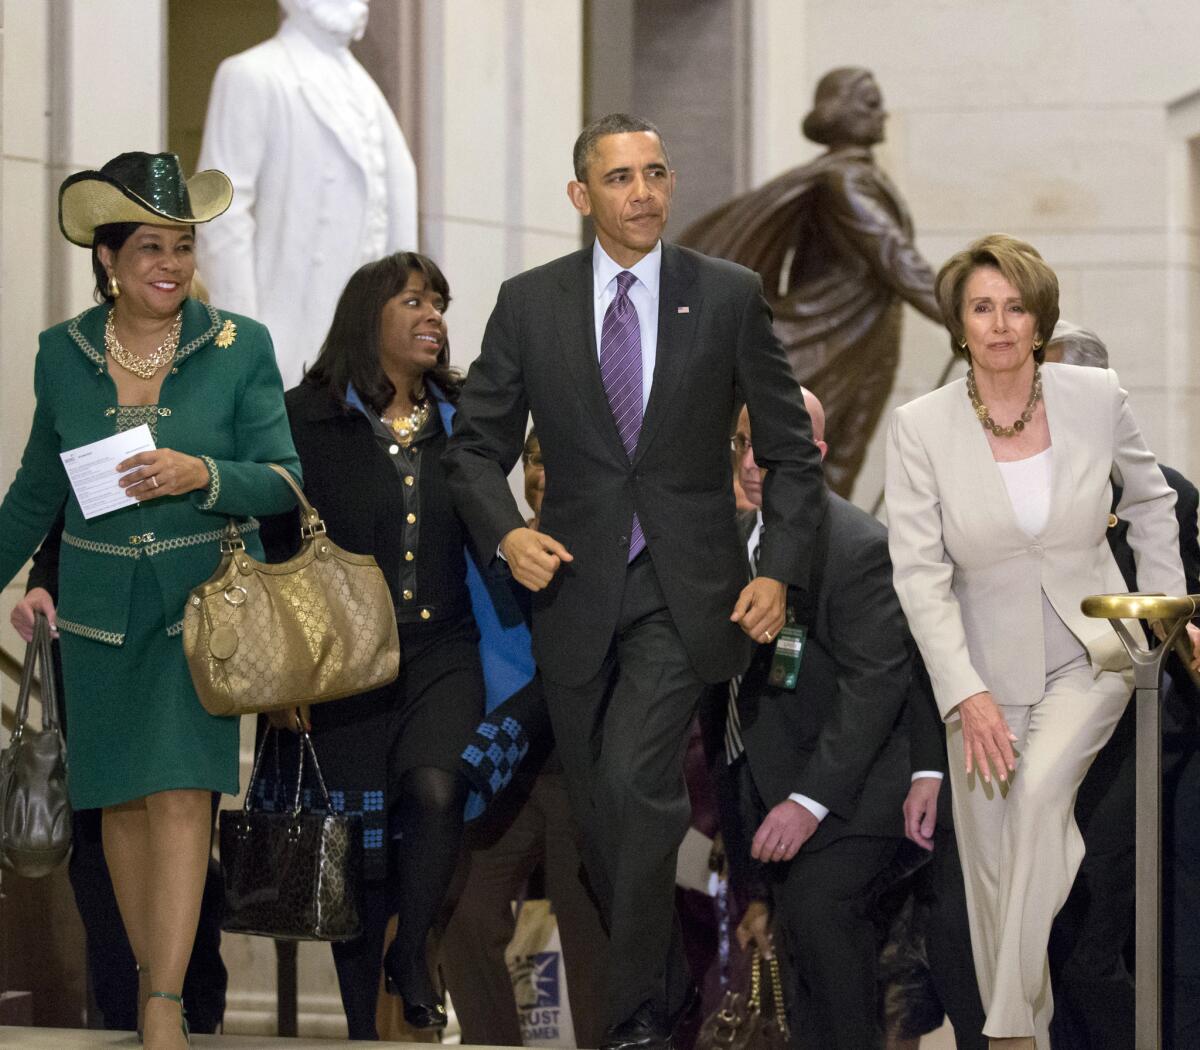 President Obama and House Minority Leader Nancy Pelosi (D-Calif.) leave a meeting with House Democrats at the Capitol in Washington with at far left, Rep. Frederica Wilson (D-Fla) and Rep. Terri Sewell (D-Ala.) second from left.